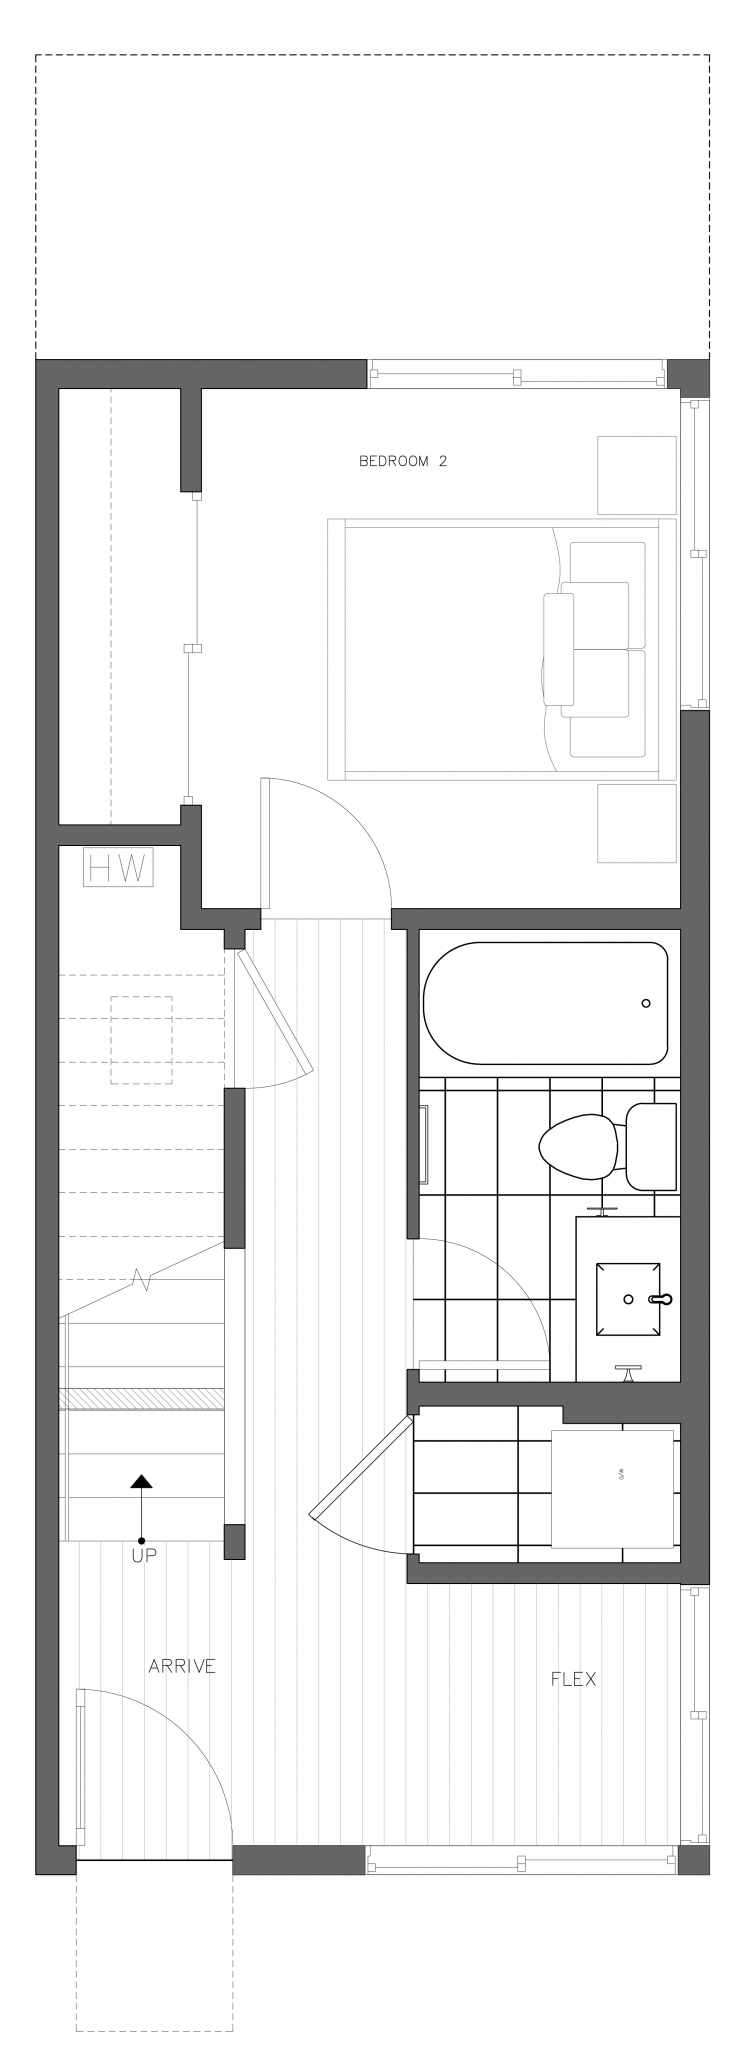 First Floor Plan of 3410B 15th Ave W, One of the Arlo Townhomes in North Queen Anne